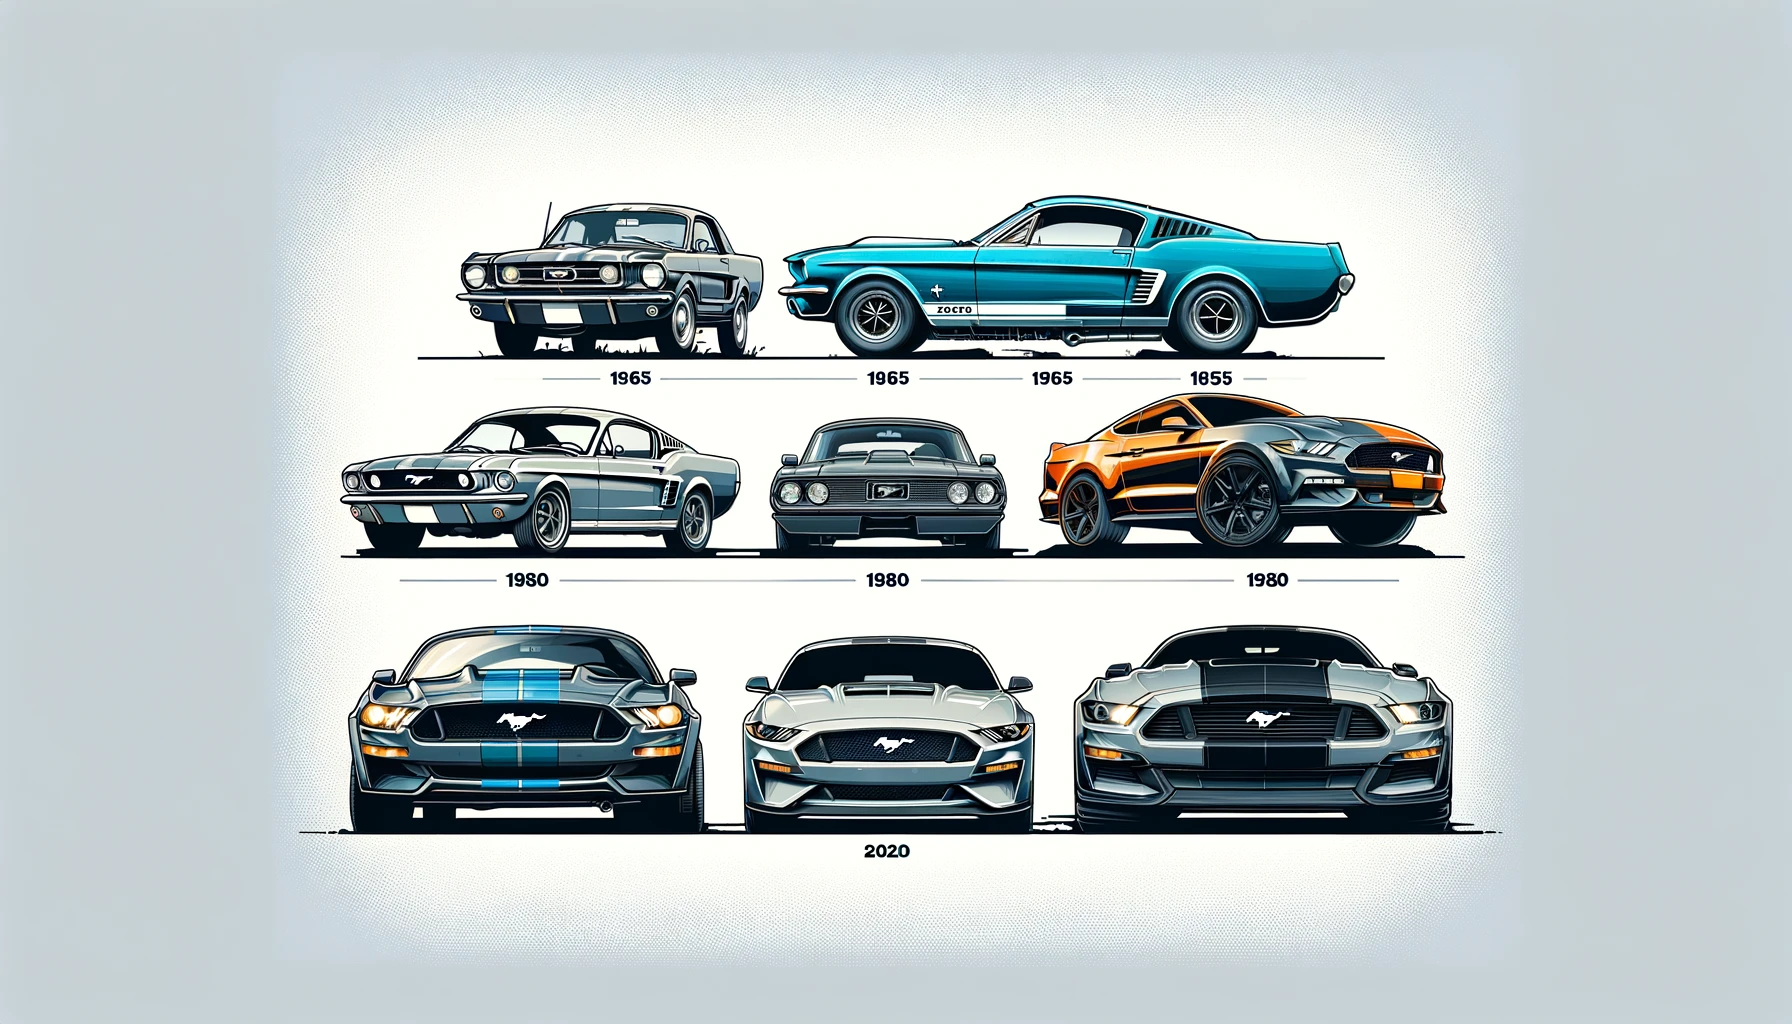 The Evolution of the Ford Mustang: From 1960s to Today